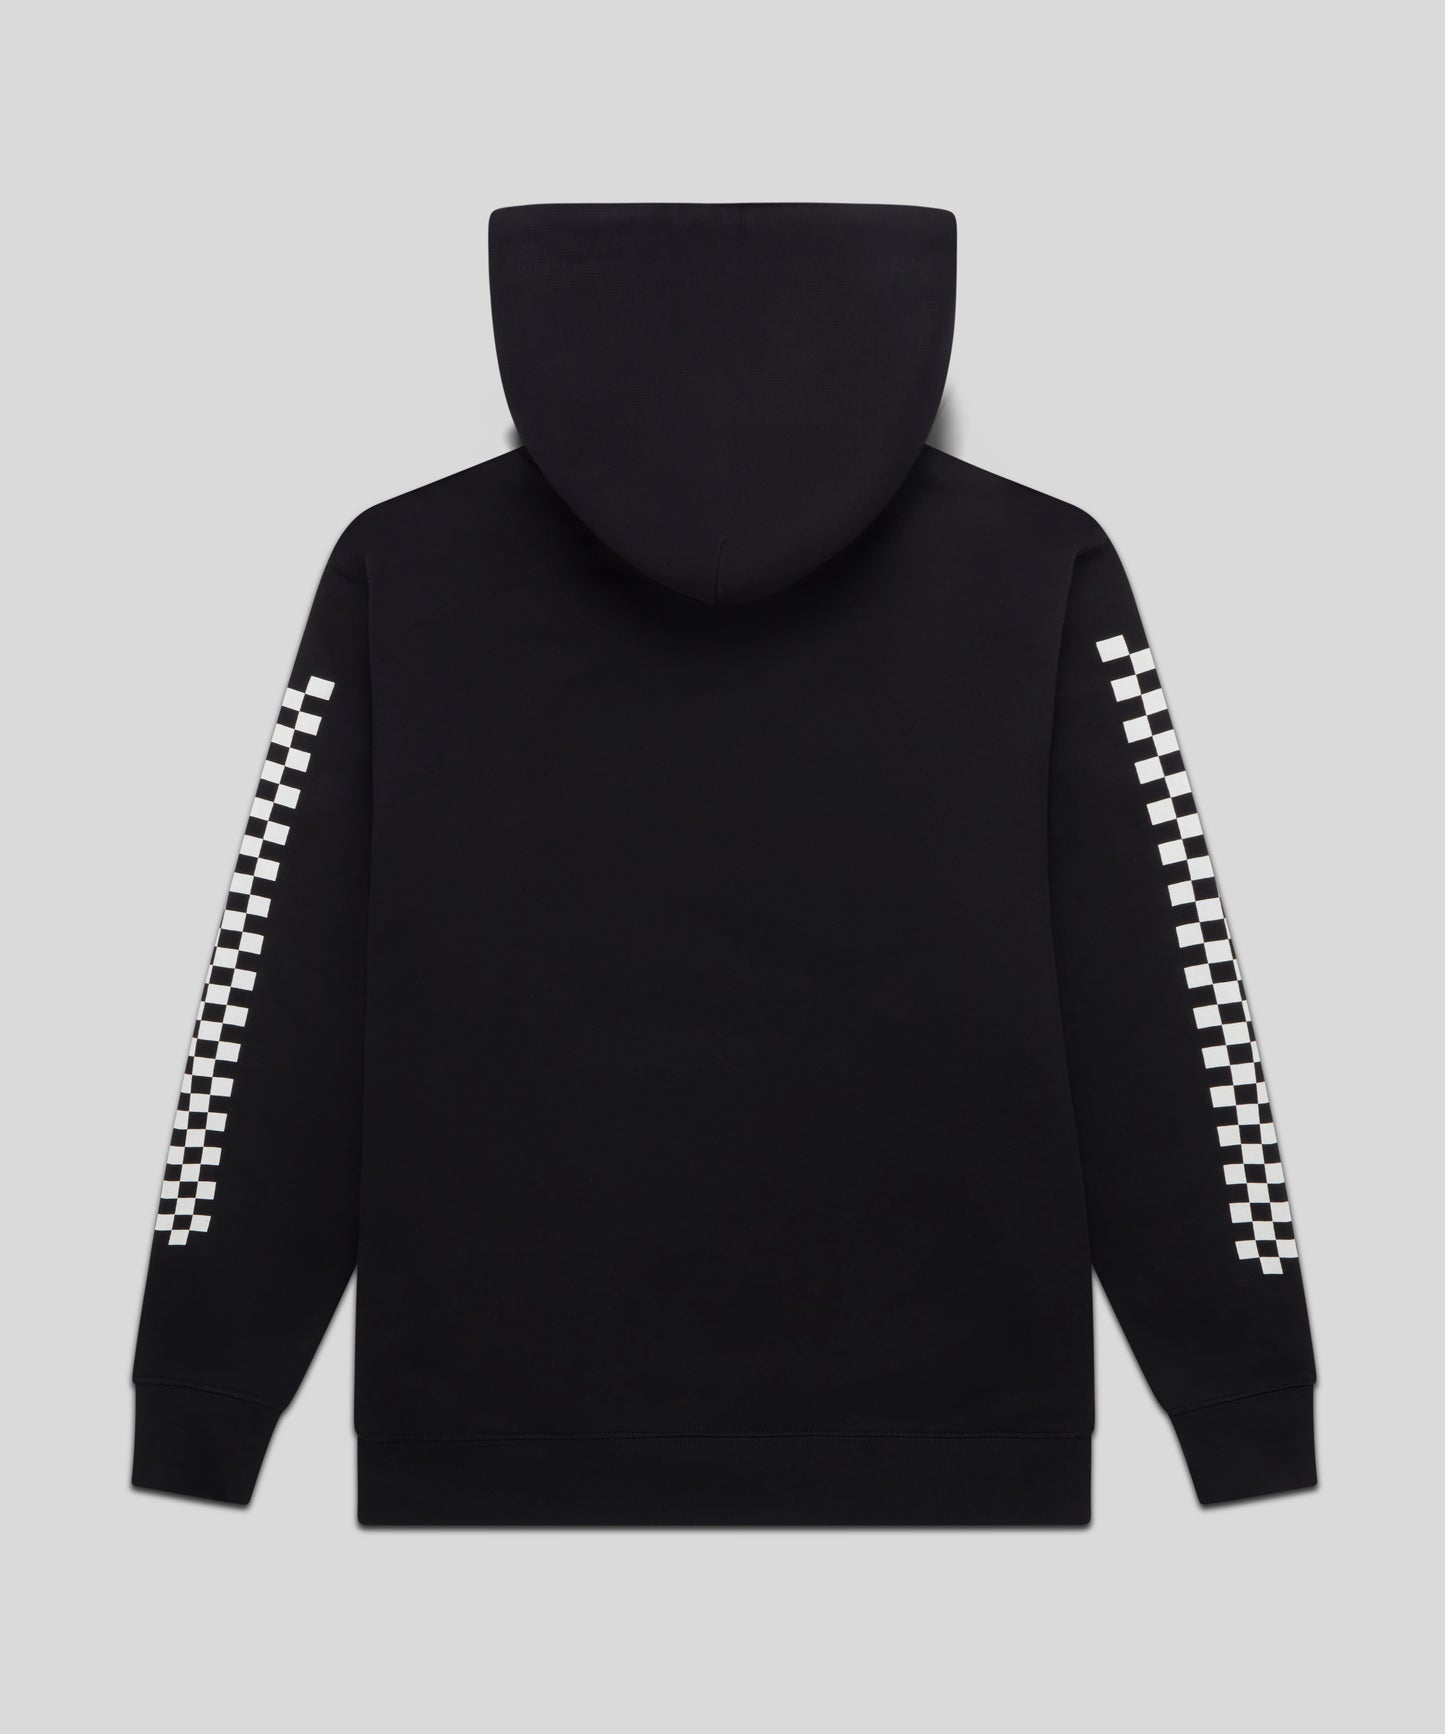 Goodwood Festival of Speed Monochrome Chequer Flag Hoodie